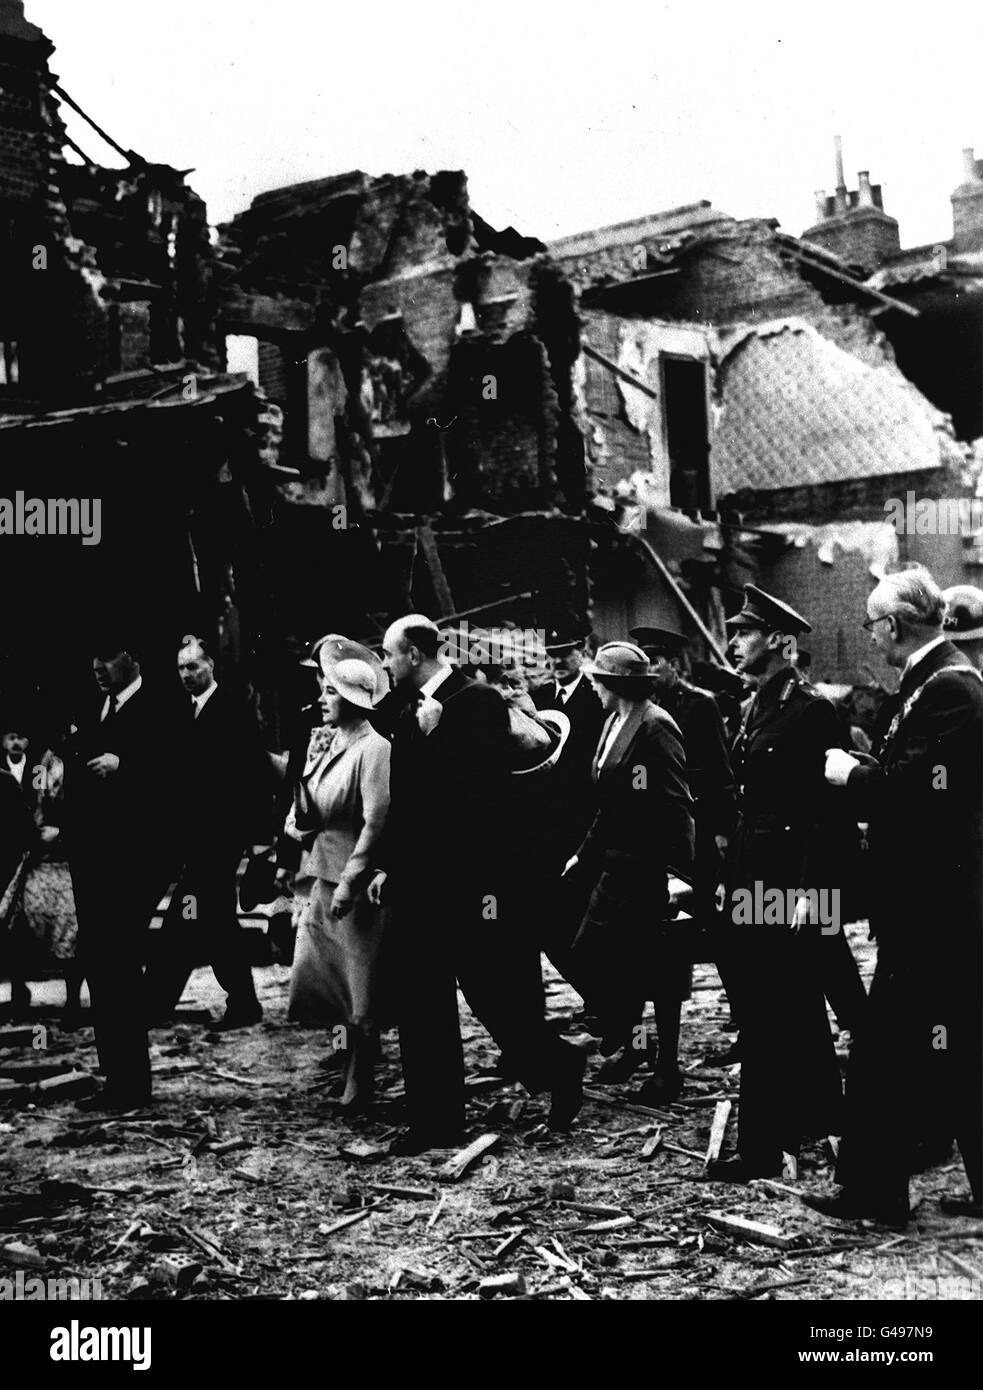 THE SECOND WORLD WAR BLITZ. QUEEN ELIZABETH (LATER THE QUEEN MOTHER) AND KING GEORGE VI (RIGHT, IN UNIFORM) WITH SIR JOHN ANDERSON, TOURING BOMBED AREAS IN SOUTH LONDON FOLLOWING LUFTWAFFE AIR RAIDS. Stock Photo